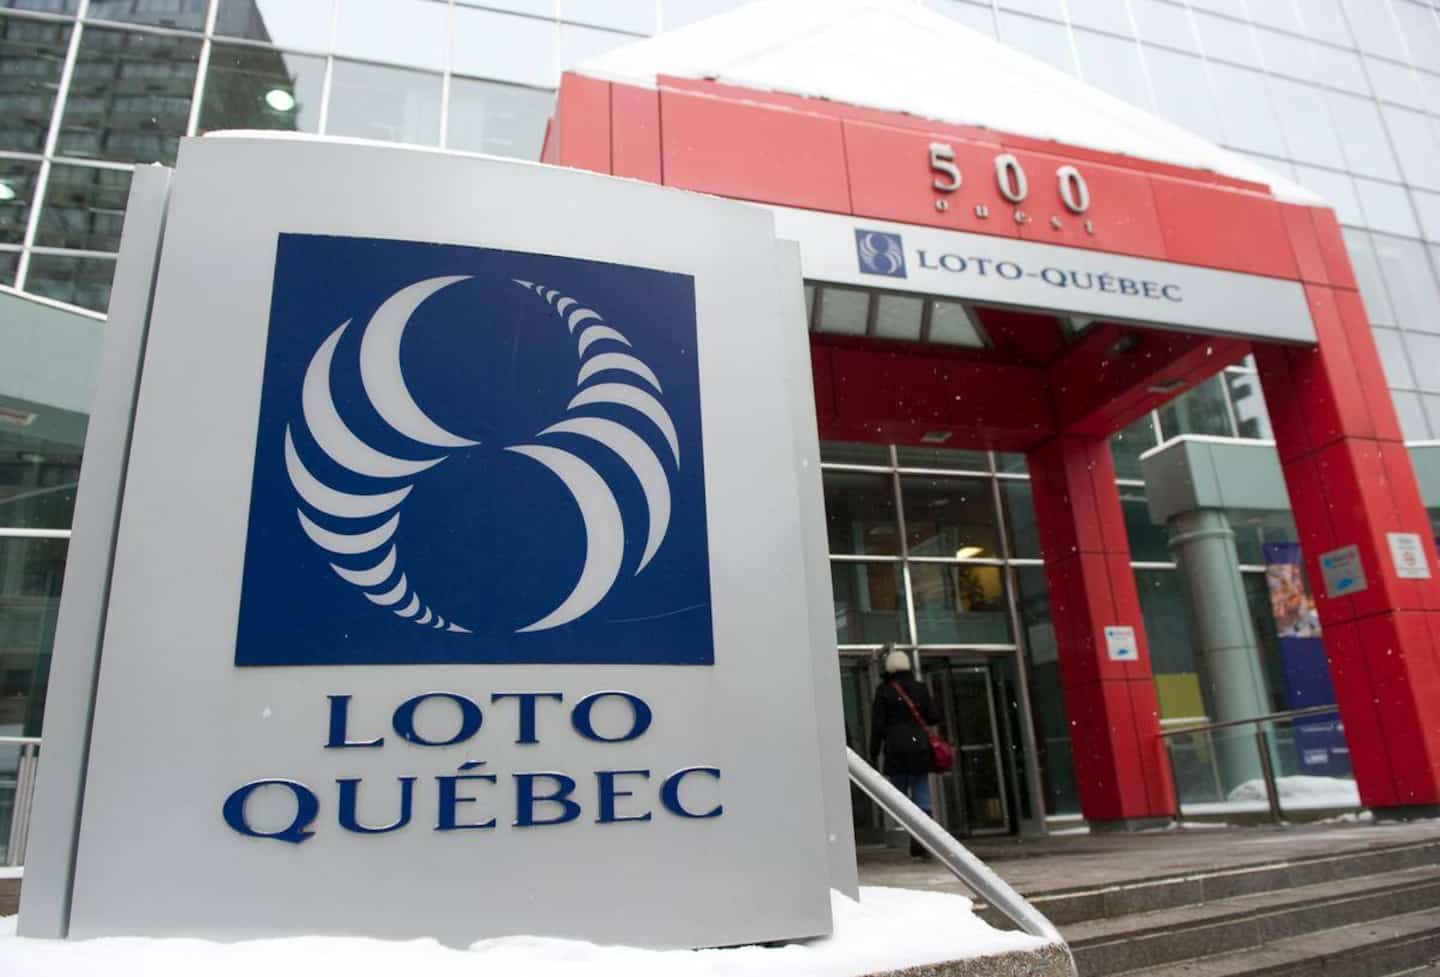 Loto-Québec benefits from the popularity of lotteries